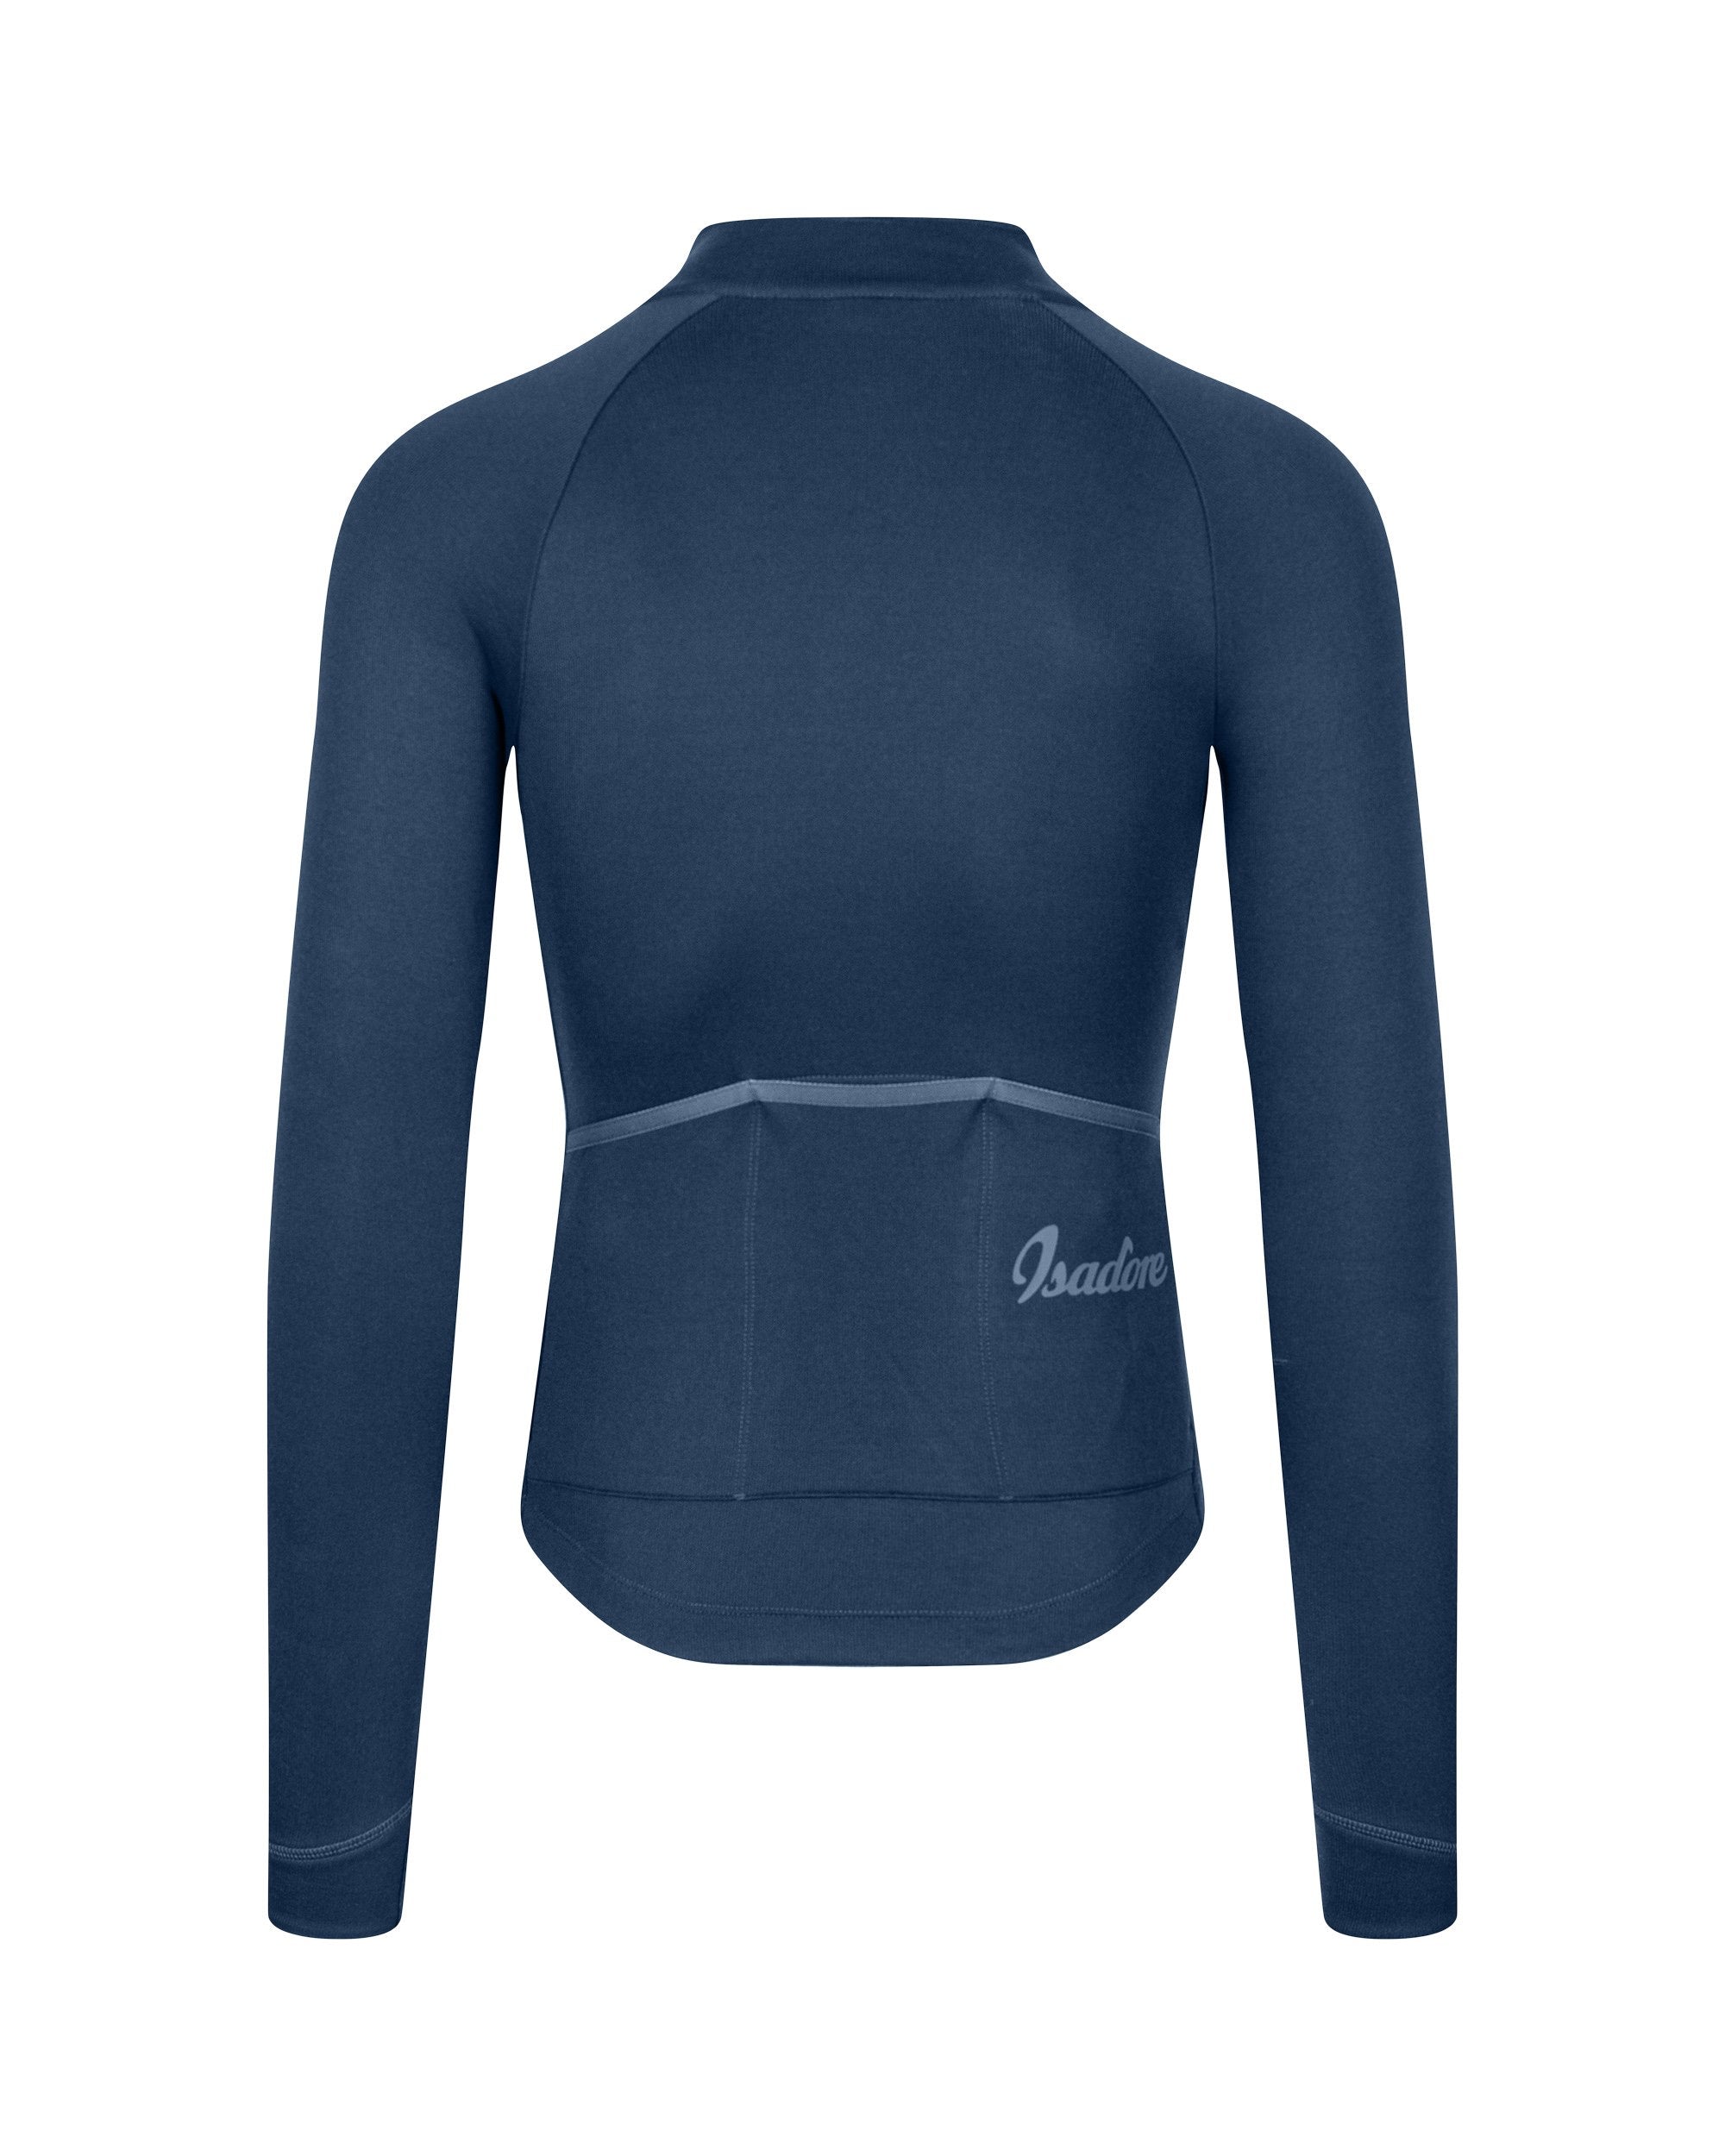 Signature Thermal Long Sleeve Jersey